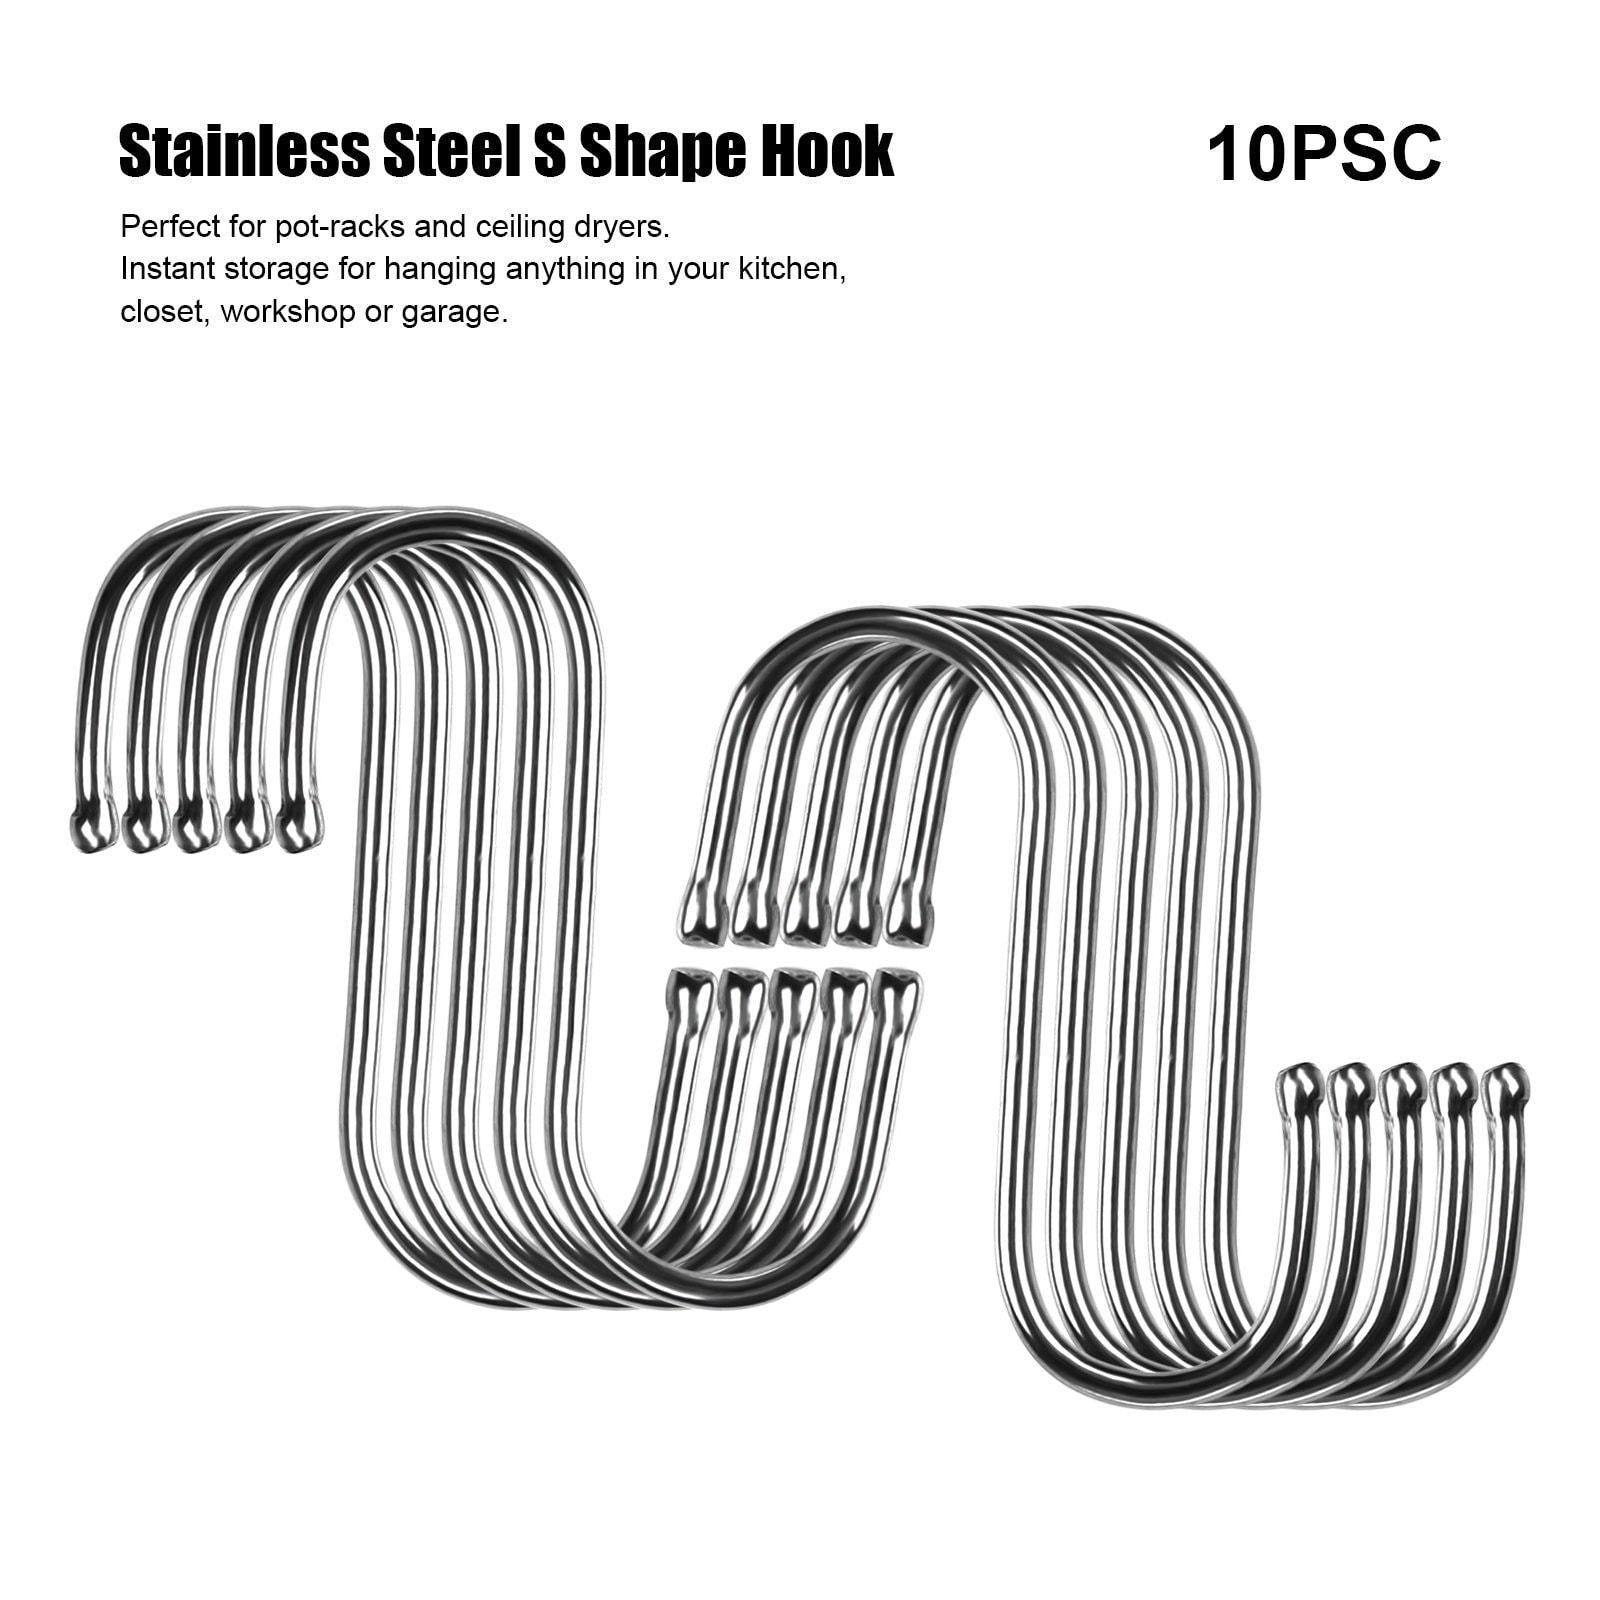 Latest s shaped hook aozbz 20 pack stainless steel heavy duty round s shaped hooks hangers for kitchen bathroom bedroom and office